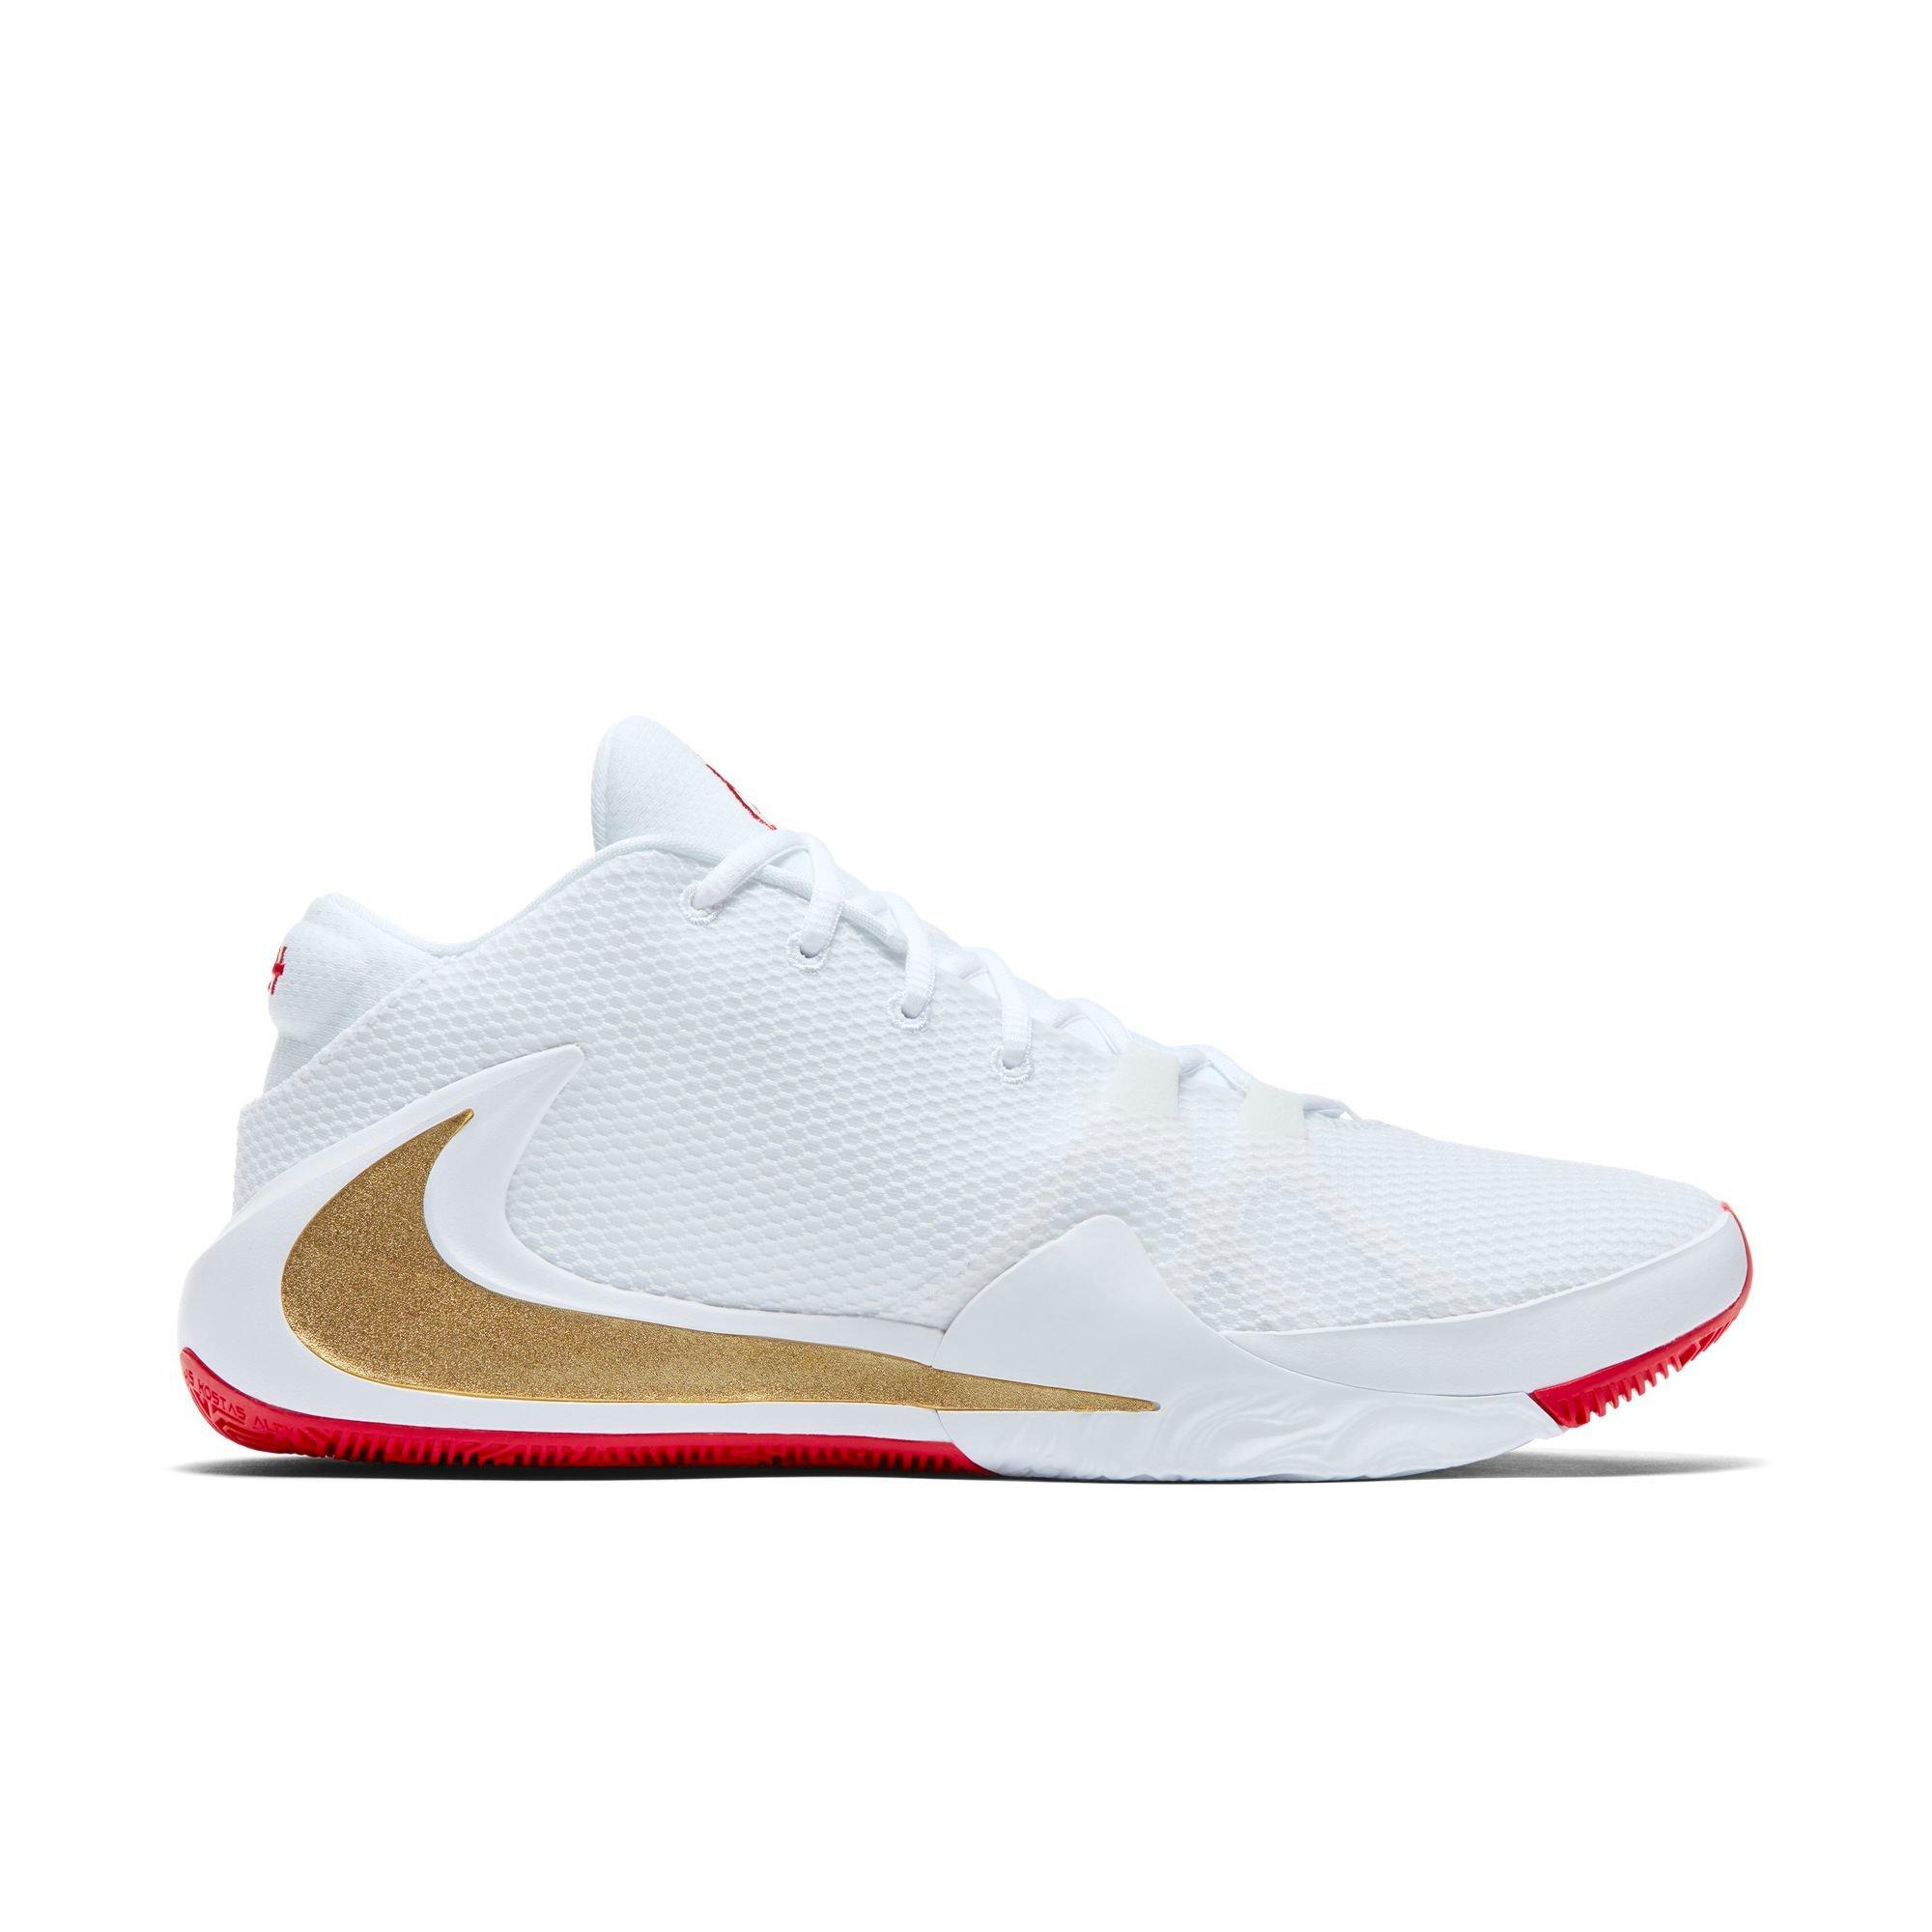 nike white and gold shoes